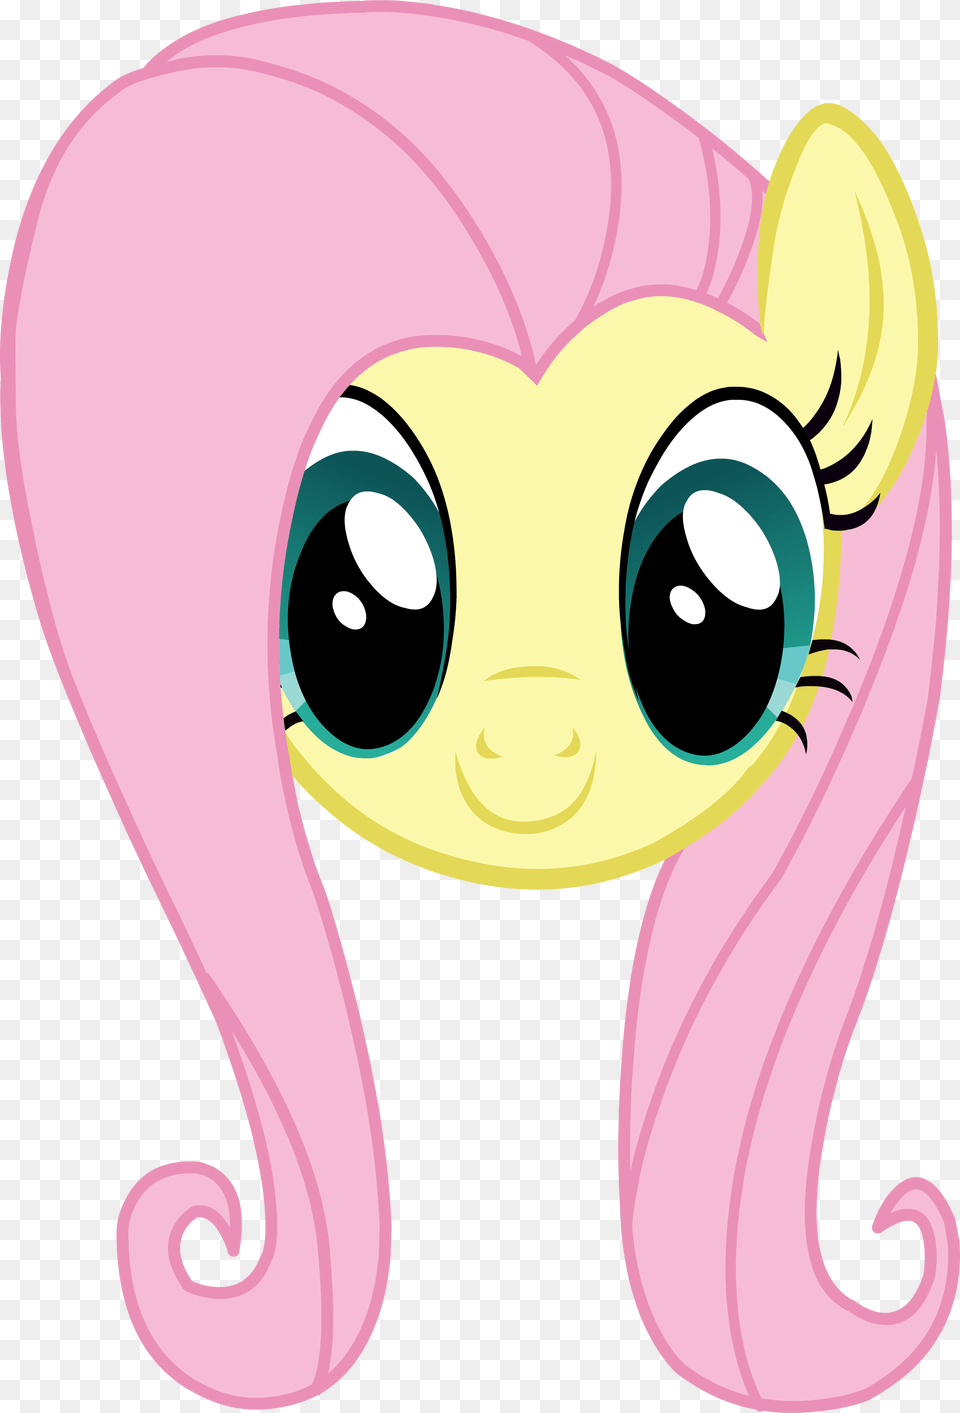 Banner Library Library Mlp Fluttershy Headshot Normal My Little Pony Fluttershy Head Png Image